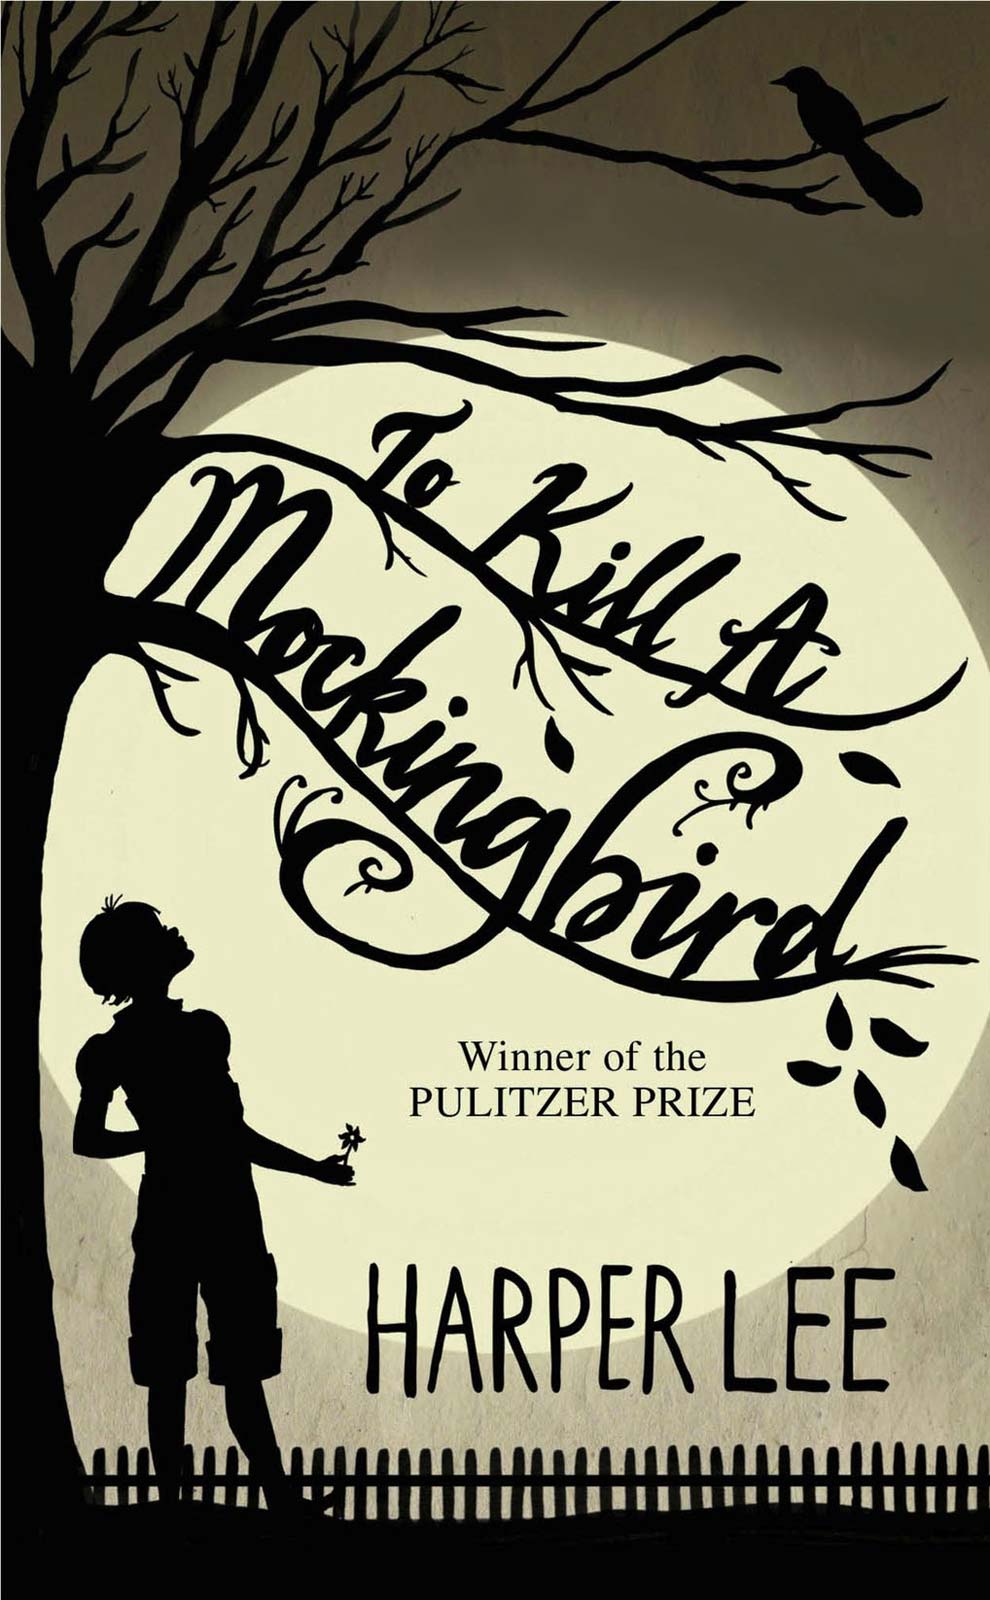 book jacket cover: a silhouette of a girl looking up at a tree.  The tree limbs spell out "To Kill a Mockingbird".